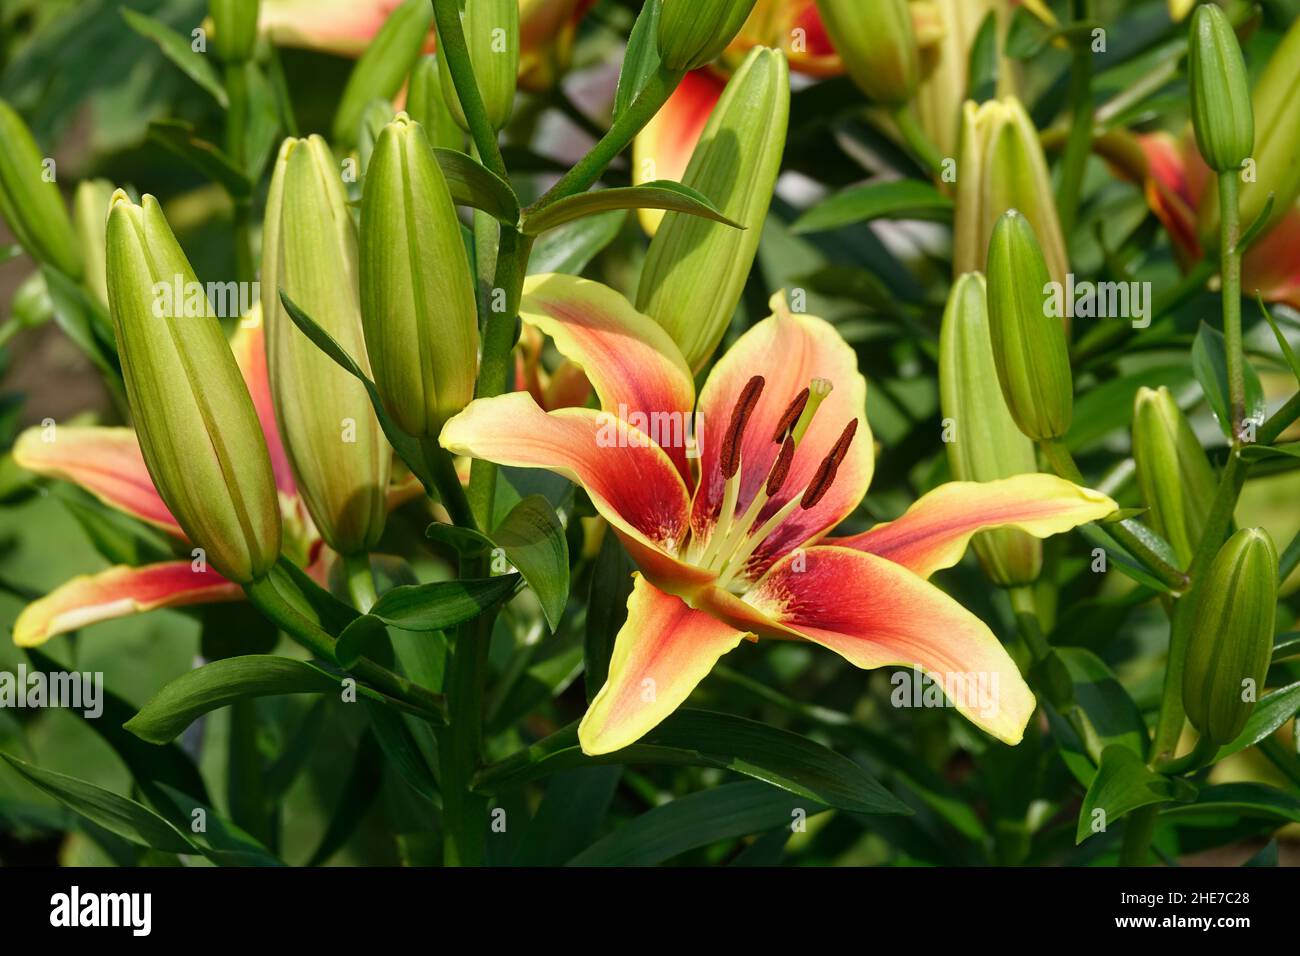 A Cluster of Yellow Lilies, Red Center Throat, Lilium Bulbiferum, with Buds, John Hancock Asiatic Lily, Viva la Vida Oriental Lily, Asian Hybrid Stock Photo